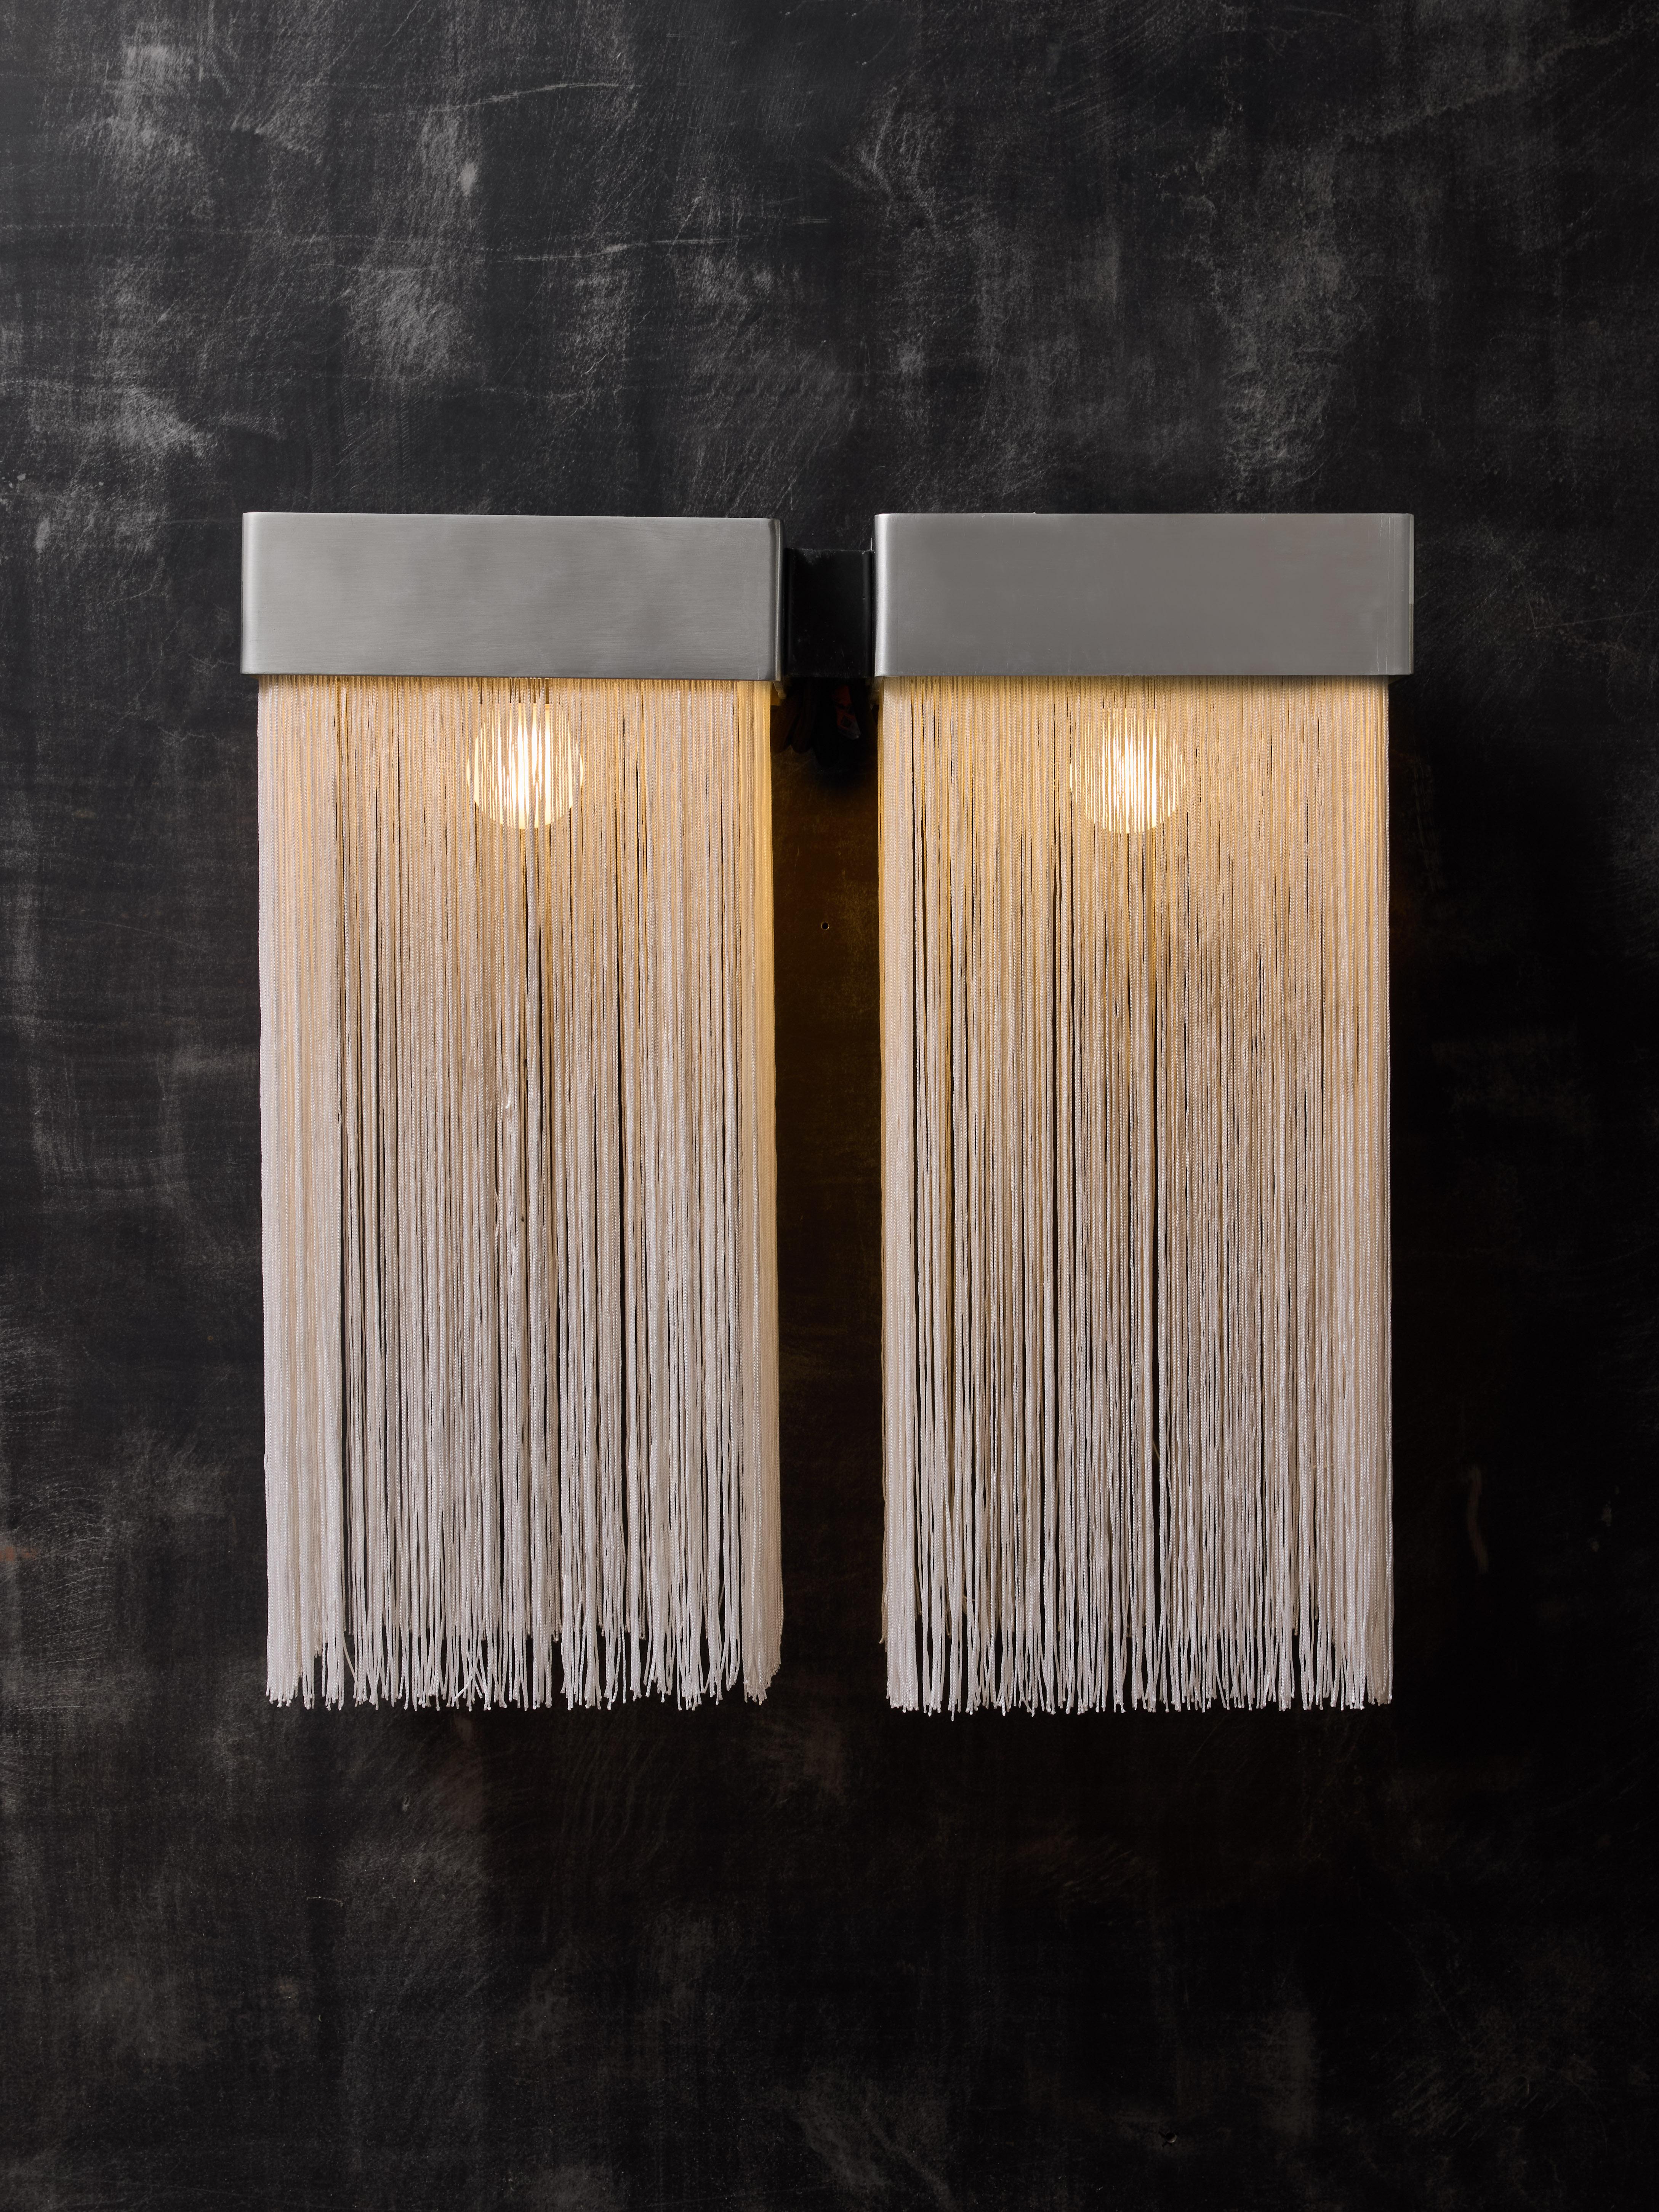 Pair of stunning wall sconces model 259/2 designed by Massimo Vignanelli and made by Gino Sarfatti's Arteluce in 1964.

Each sconce is made of two aluminium square frames from where hang fabric fringes surrounding the light sources. Both frames are